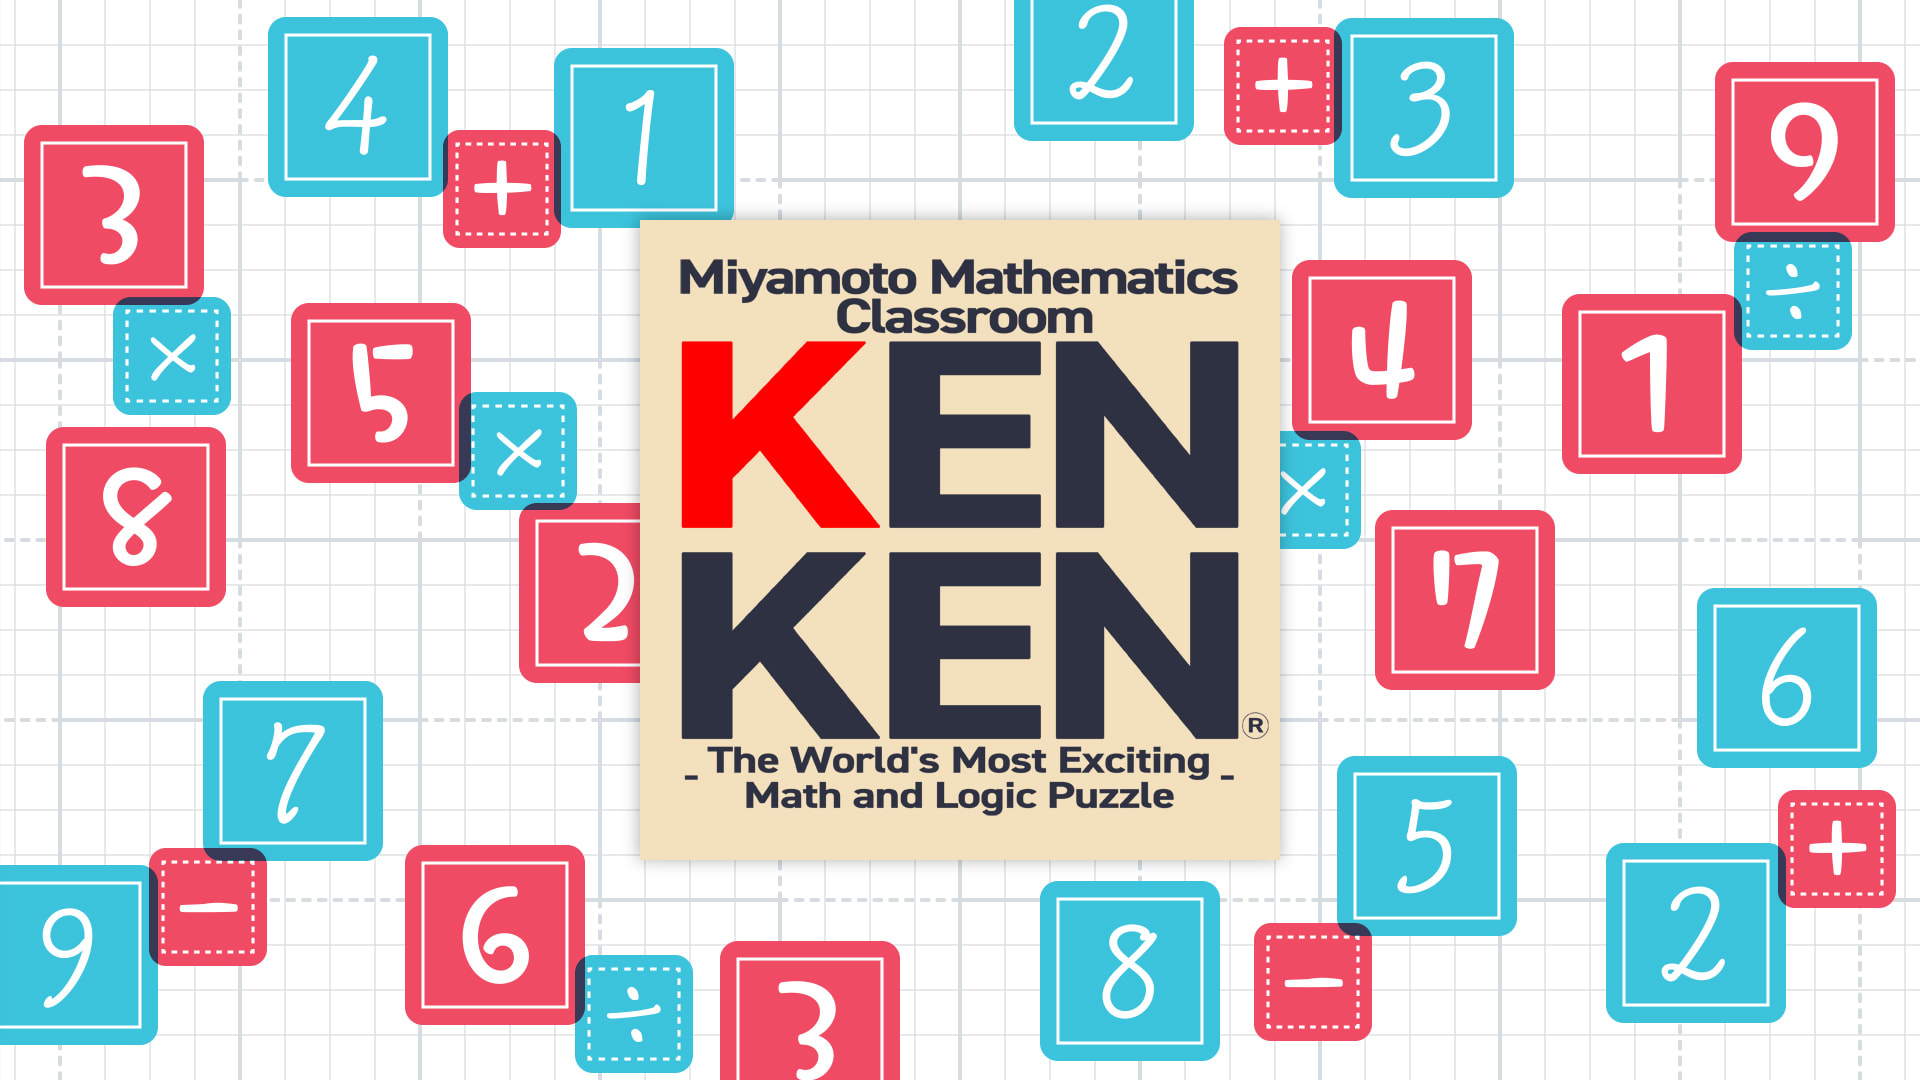 MMC KENKEN - The World's Most Exciting Math and Logic Puzzle -